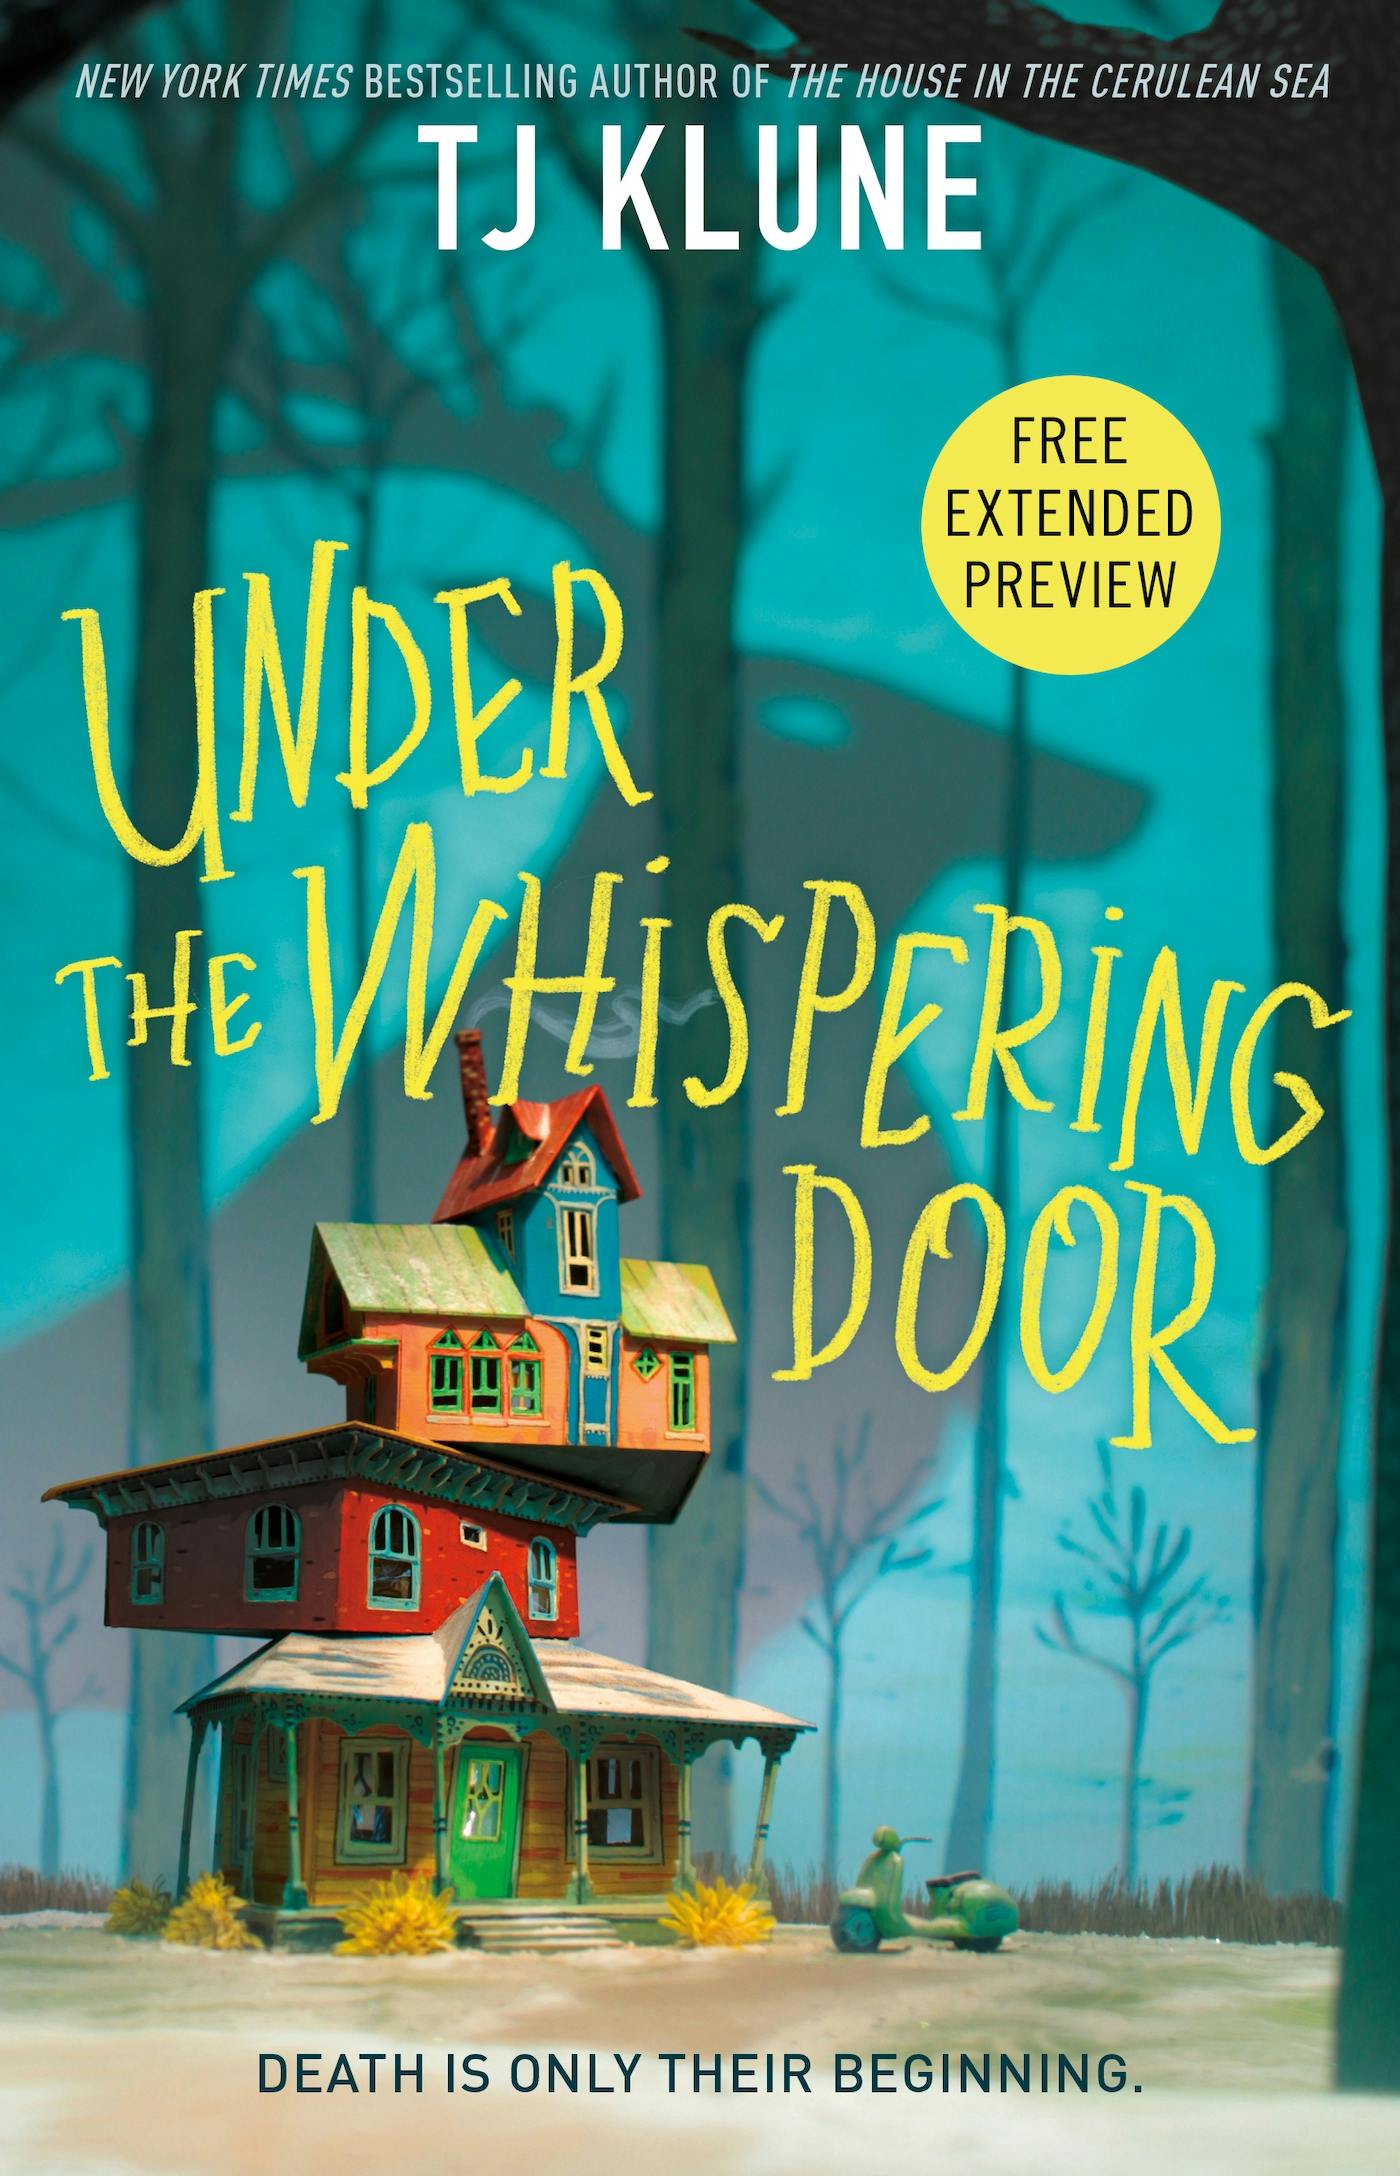 Cover for the book titled as: Under the Whispering Door Sneak Peek